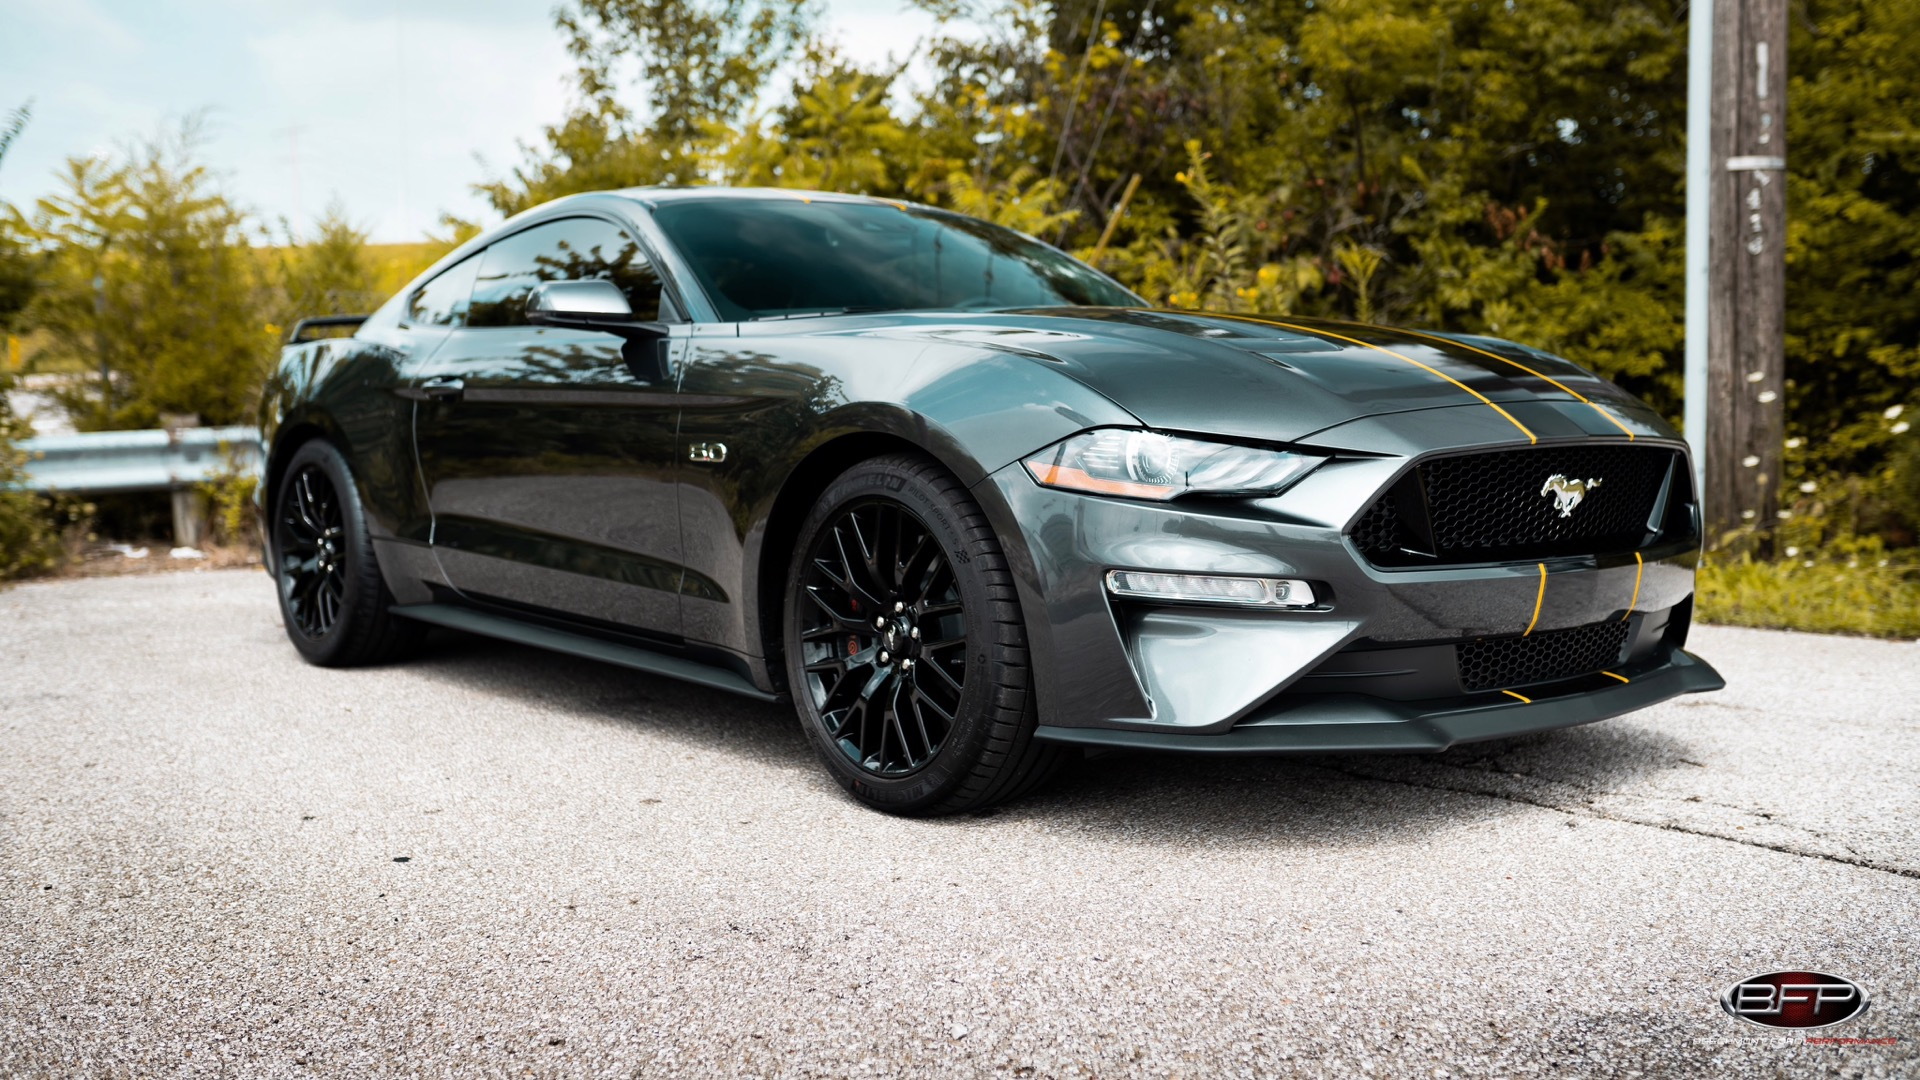 Ohio Dealership Selling 750 Hp Supercharged Ford Mustang Gts For 45 000